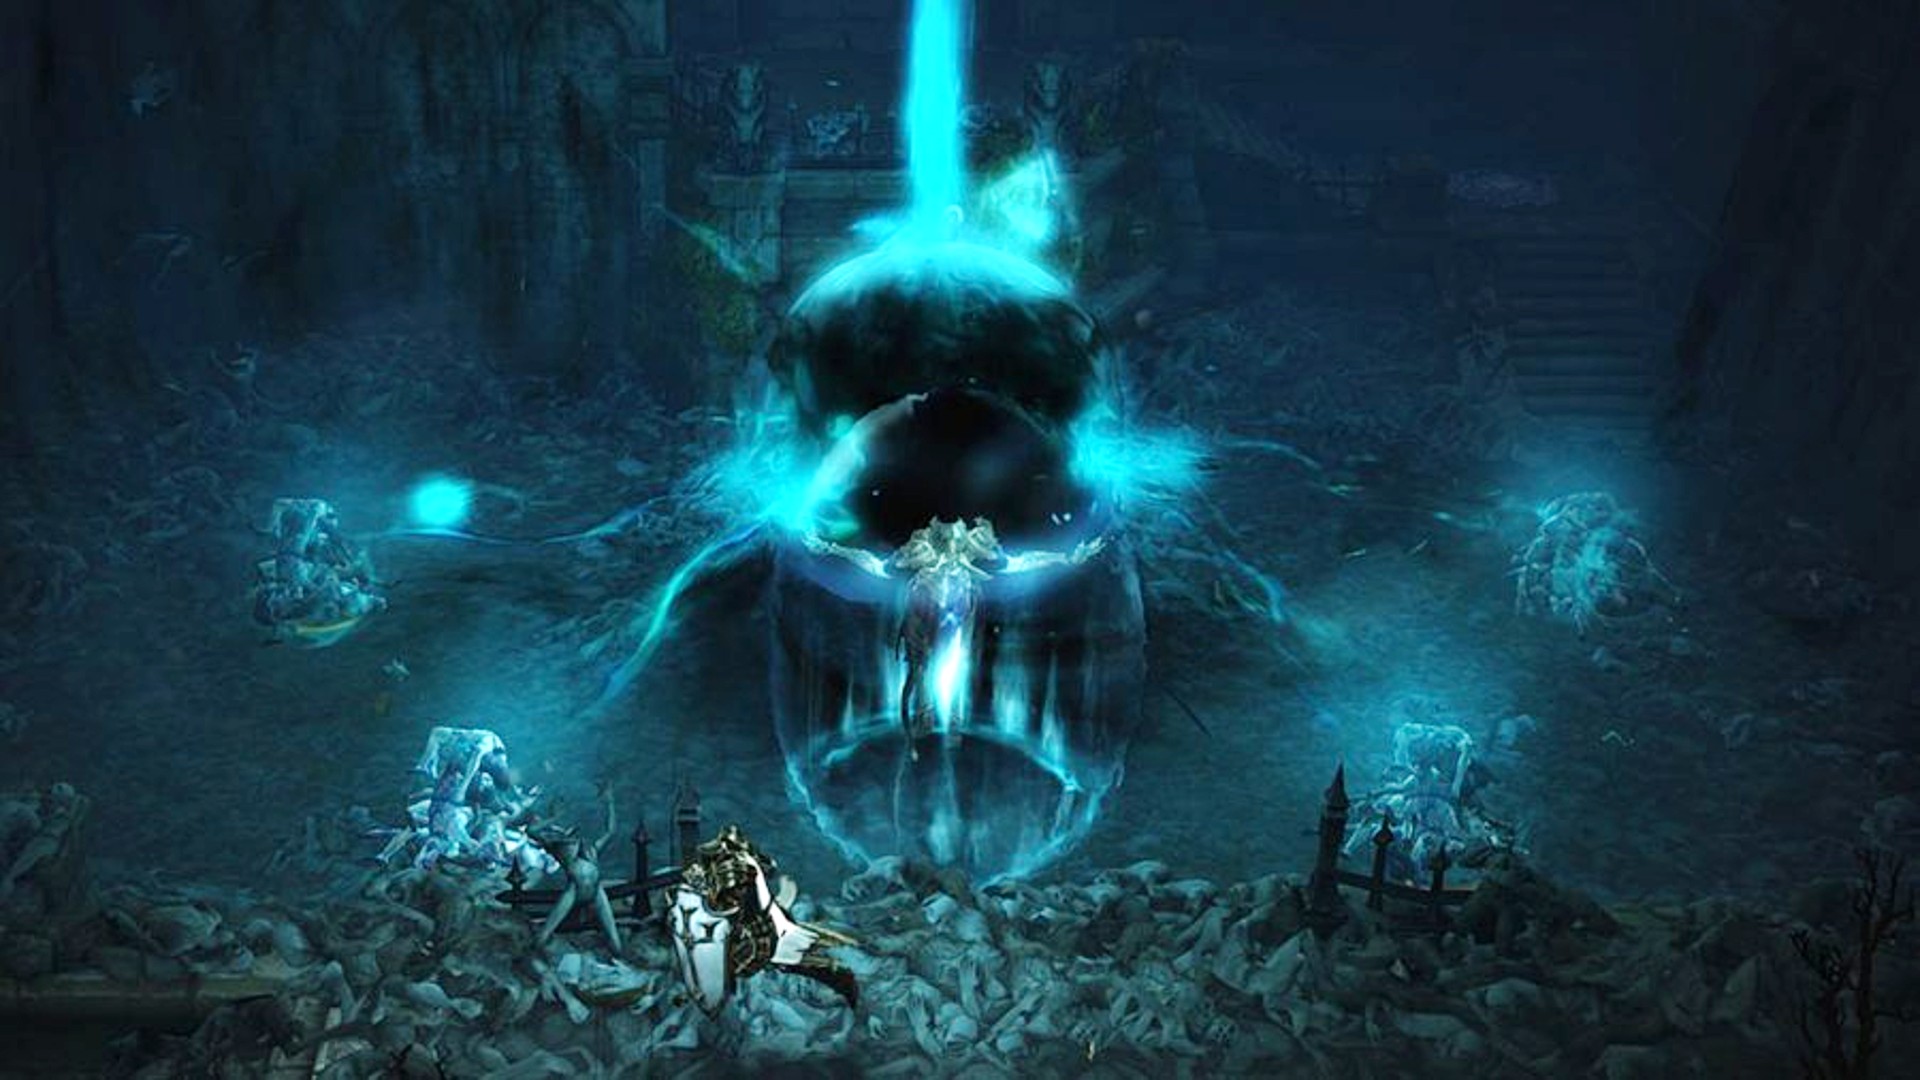 Best RPG games: Diablo 3. Image shows a magical ritual being carried out in a dark cavern.